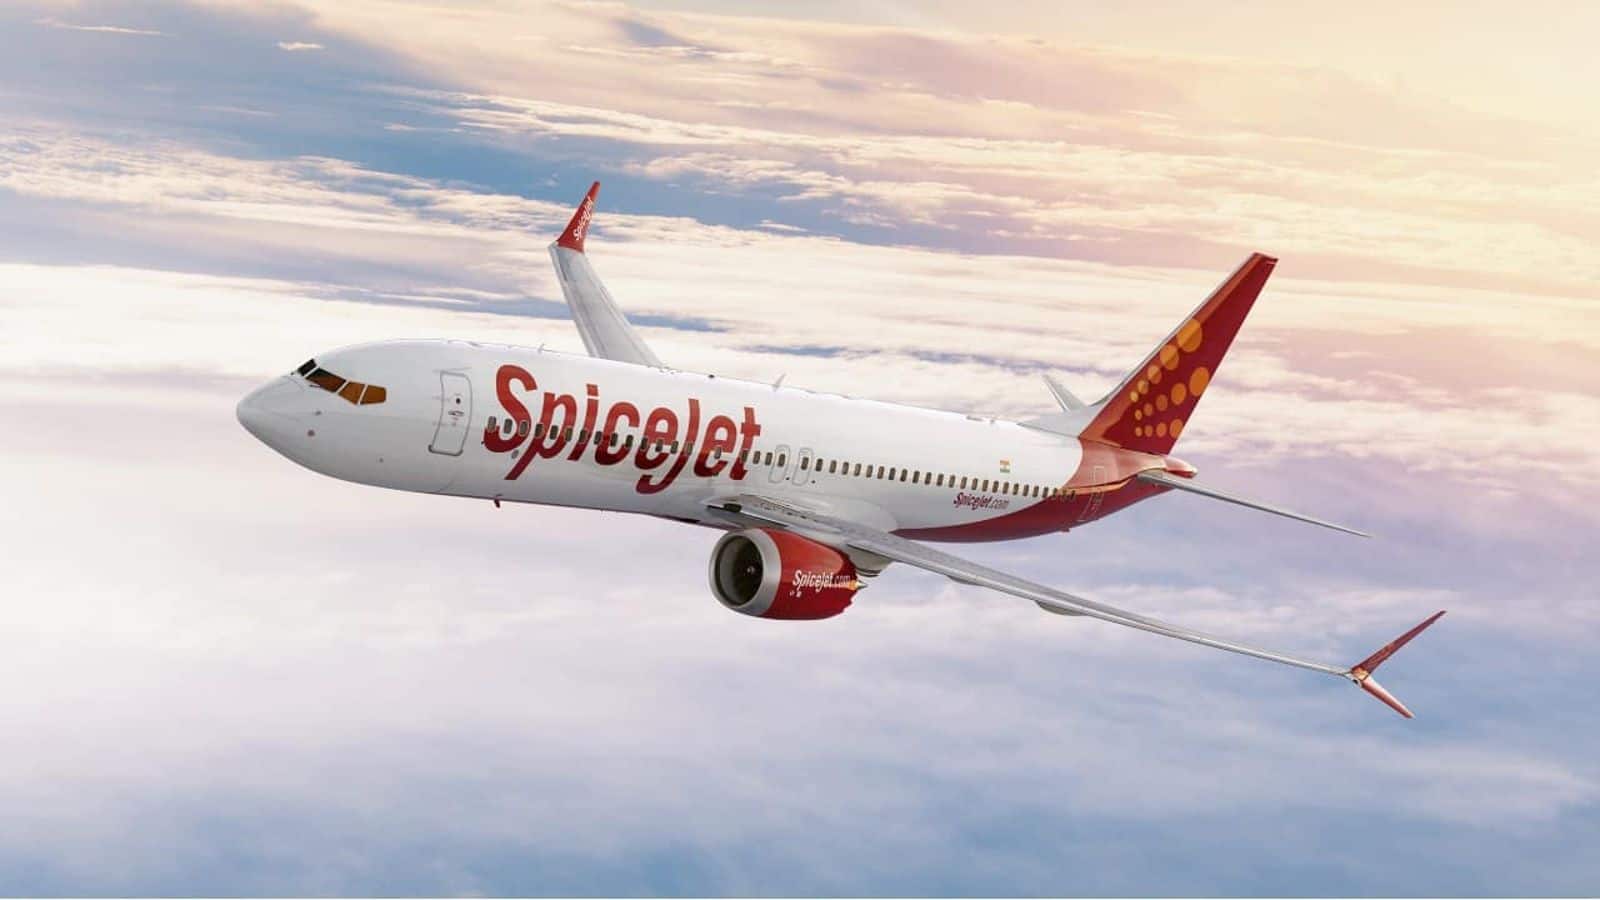 SpiceJet shares rise amidst ₹450cr refund claim from Kalanithi Maran